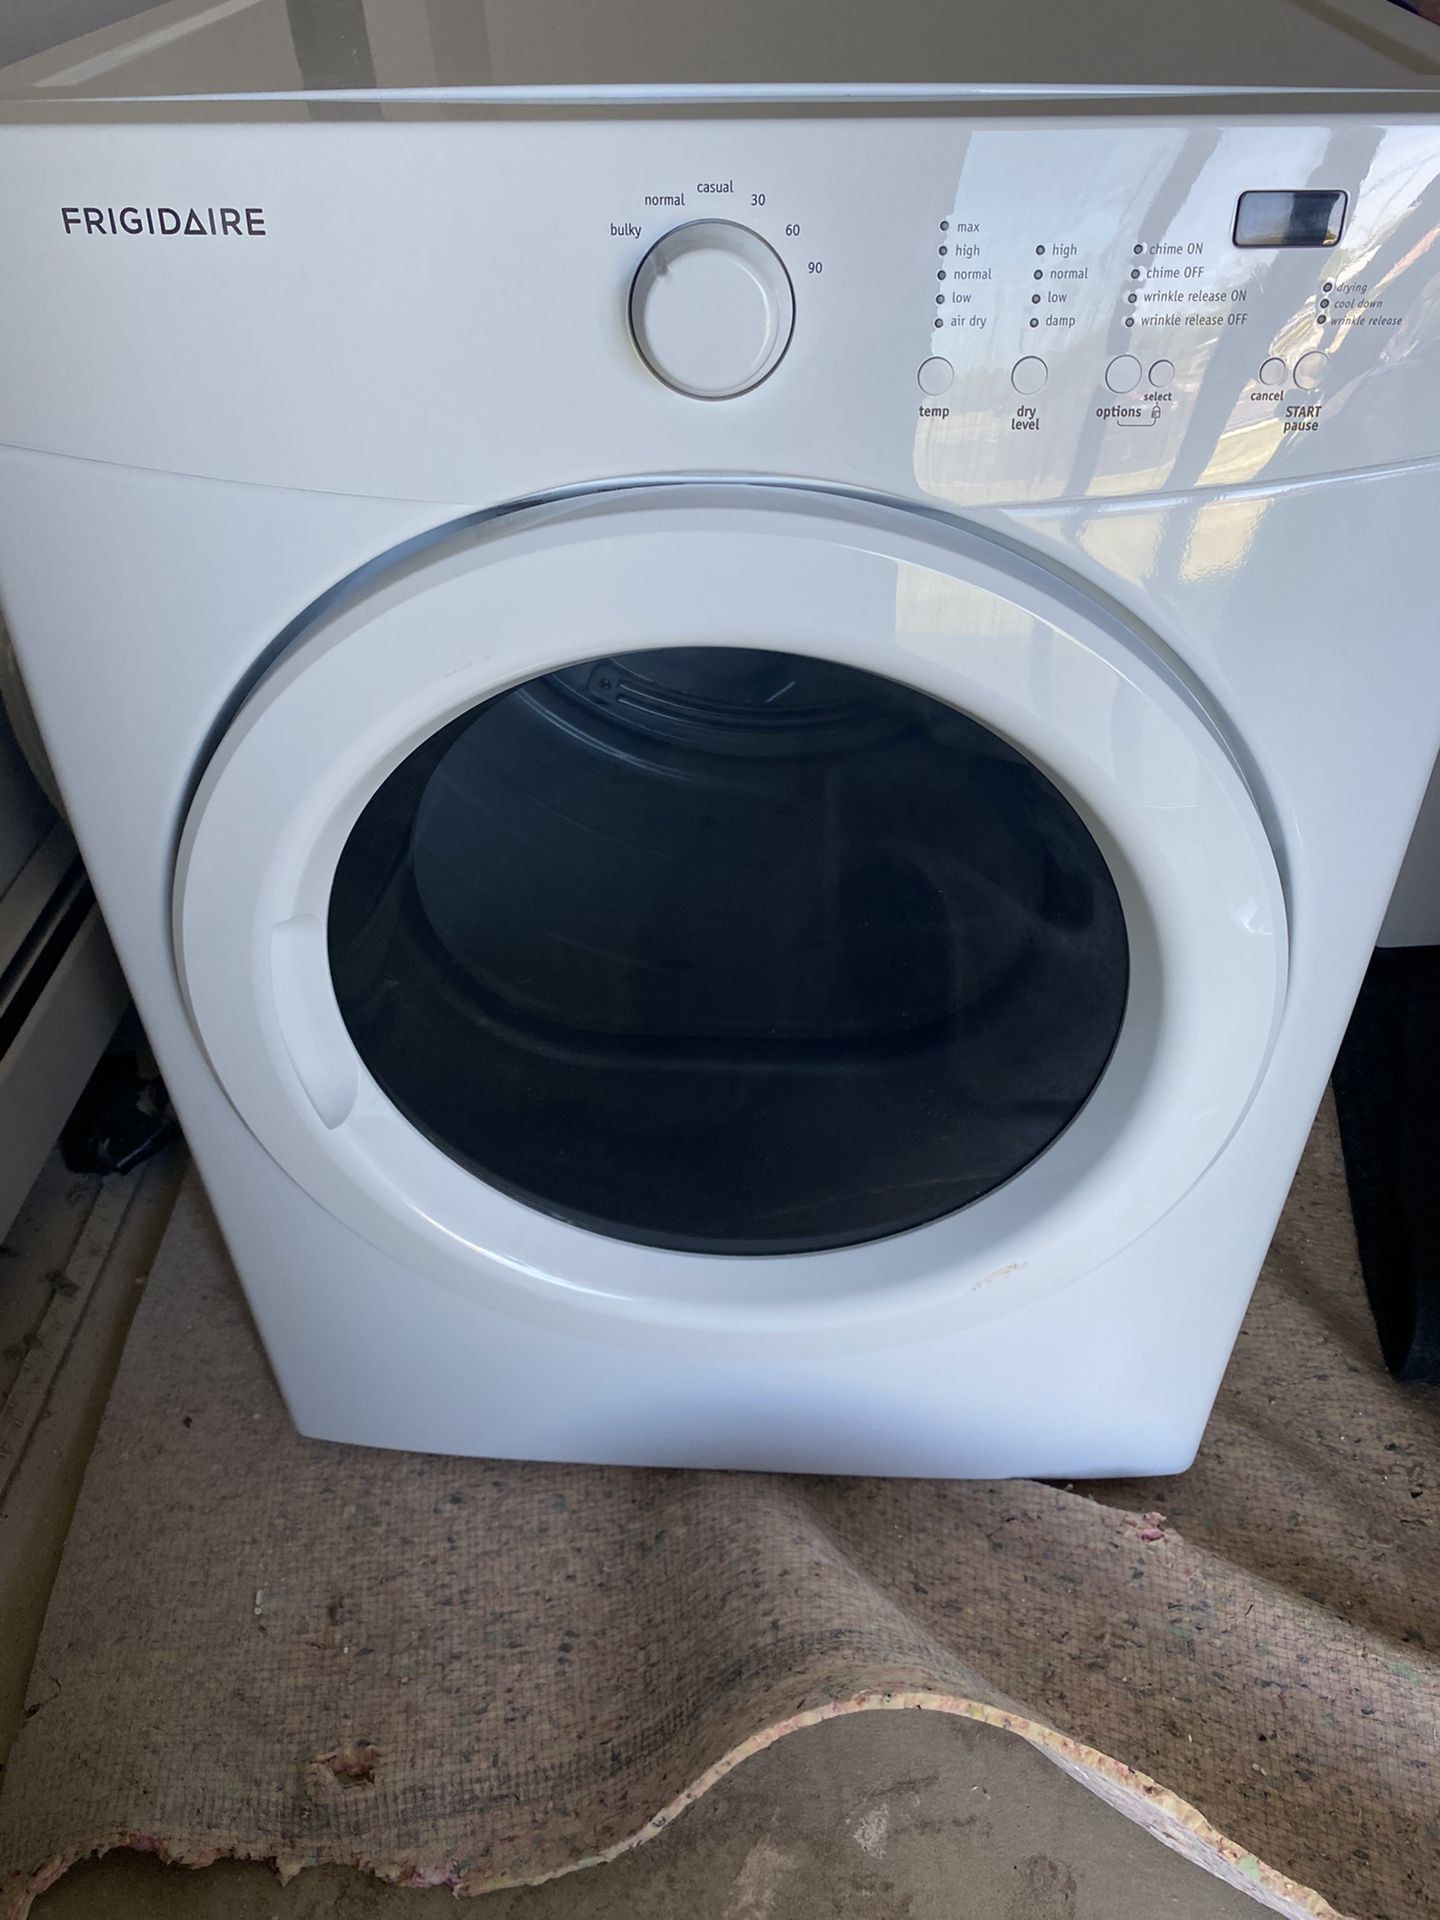 Electric dryer and washer but it needs a tumbler